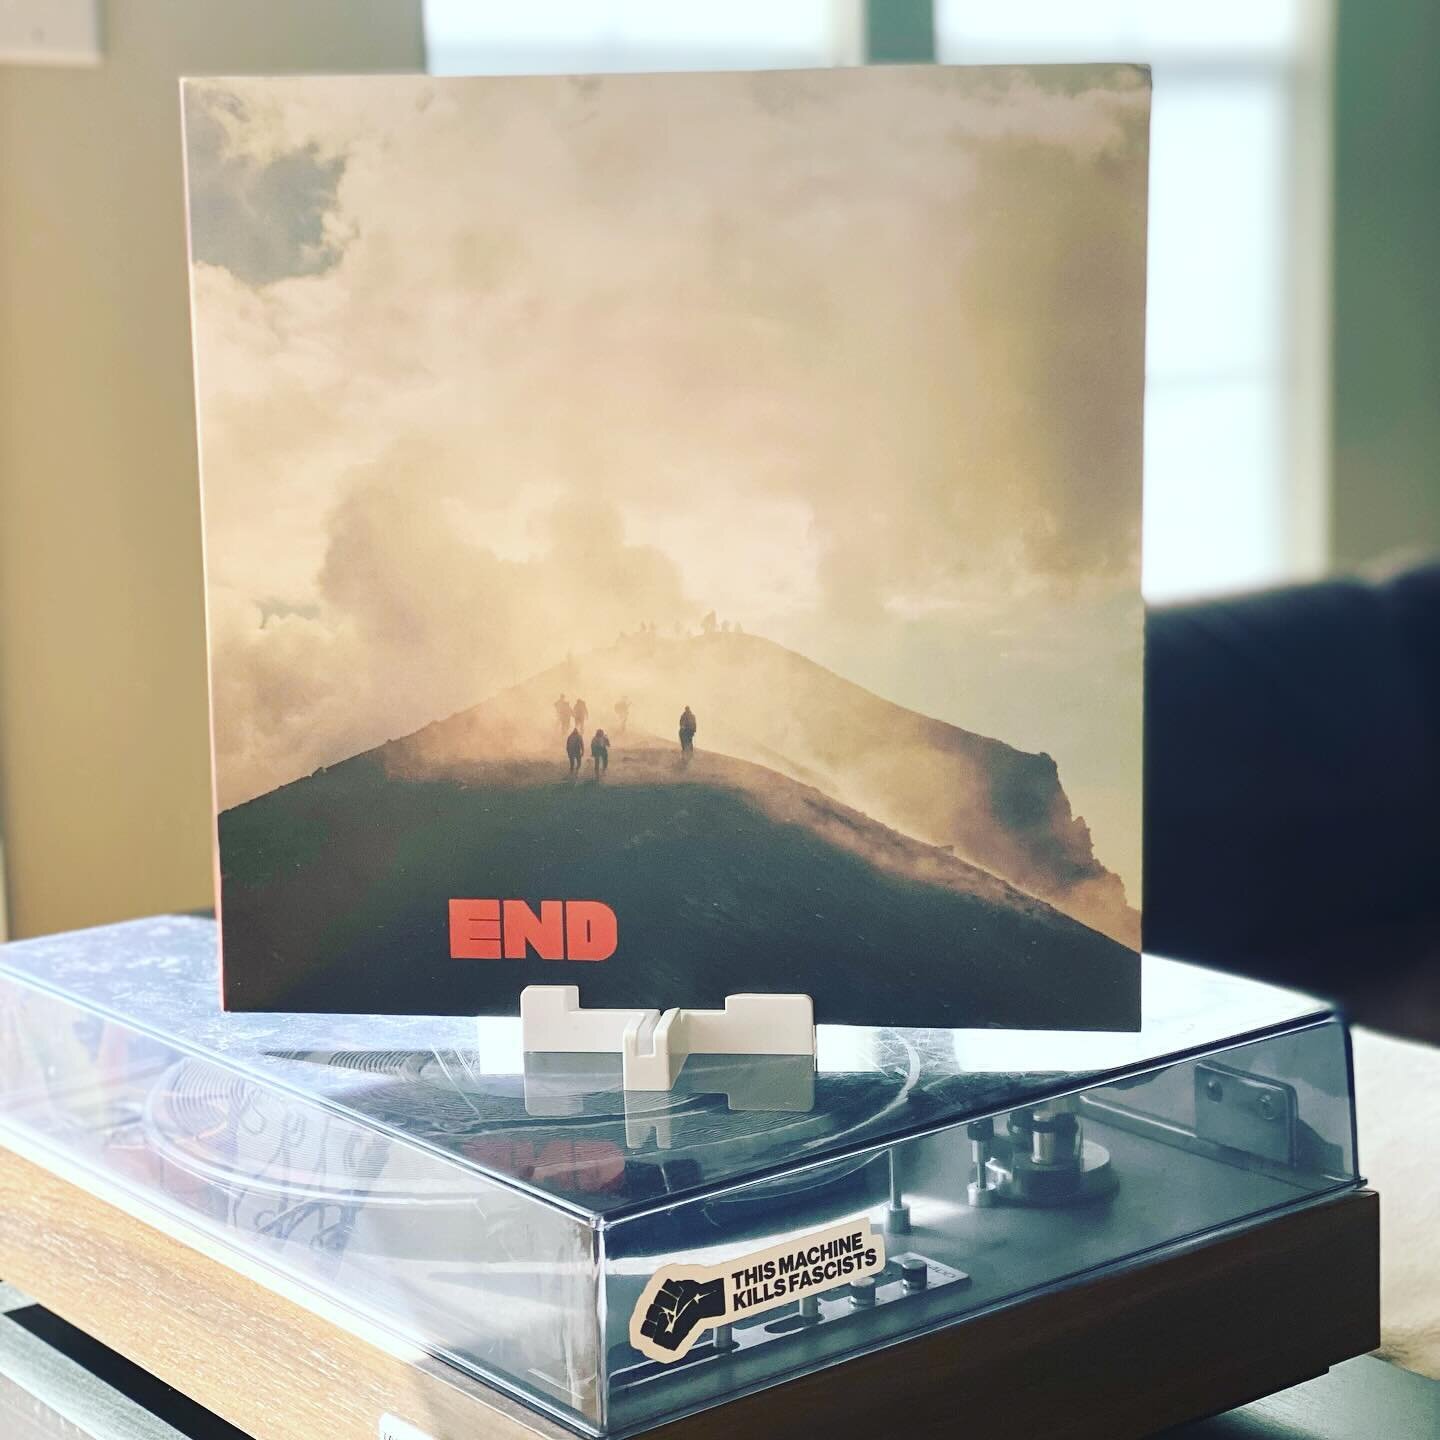 Explosions in the Sky &ndash; The End [2023] &ndash; Thanks to @superkaybee; your cats obviously have good taste in music.
.
#postrock #recordprops #catlife #recordcollection #vinylcollection #sundayvibes #nowplaying #nowspinning